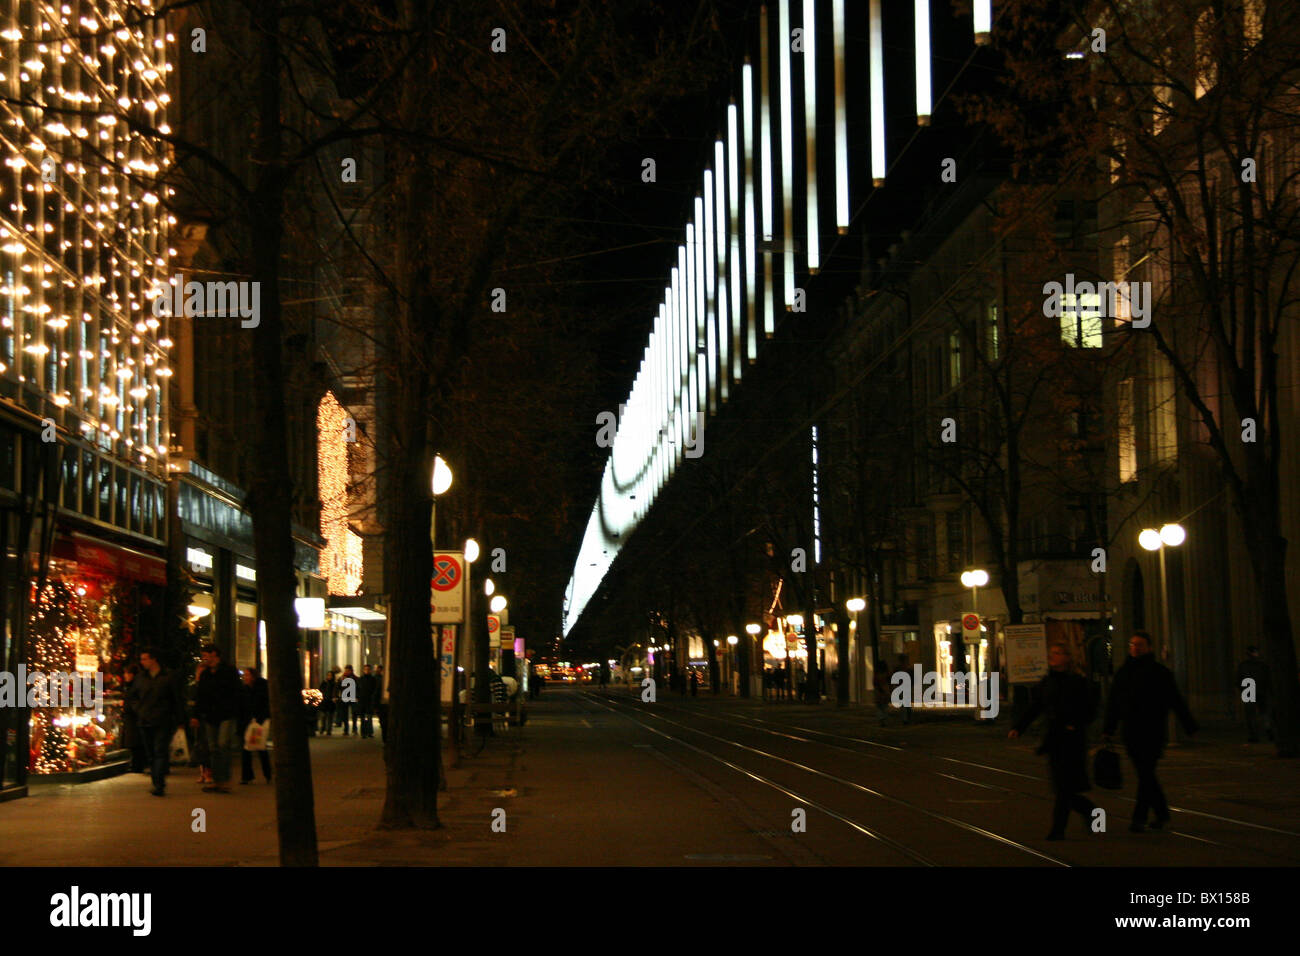 Zurich town city Christmas Bahnhofstrasse at night night business trades stores shopping person lighting Stock Photo